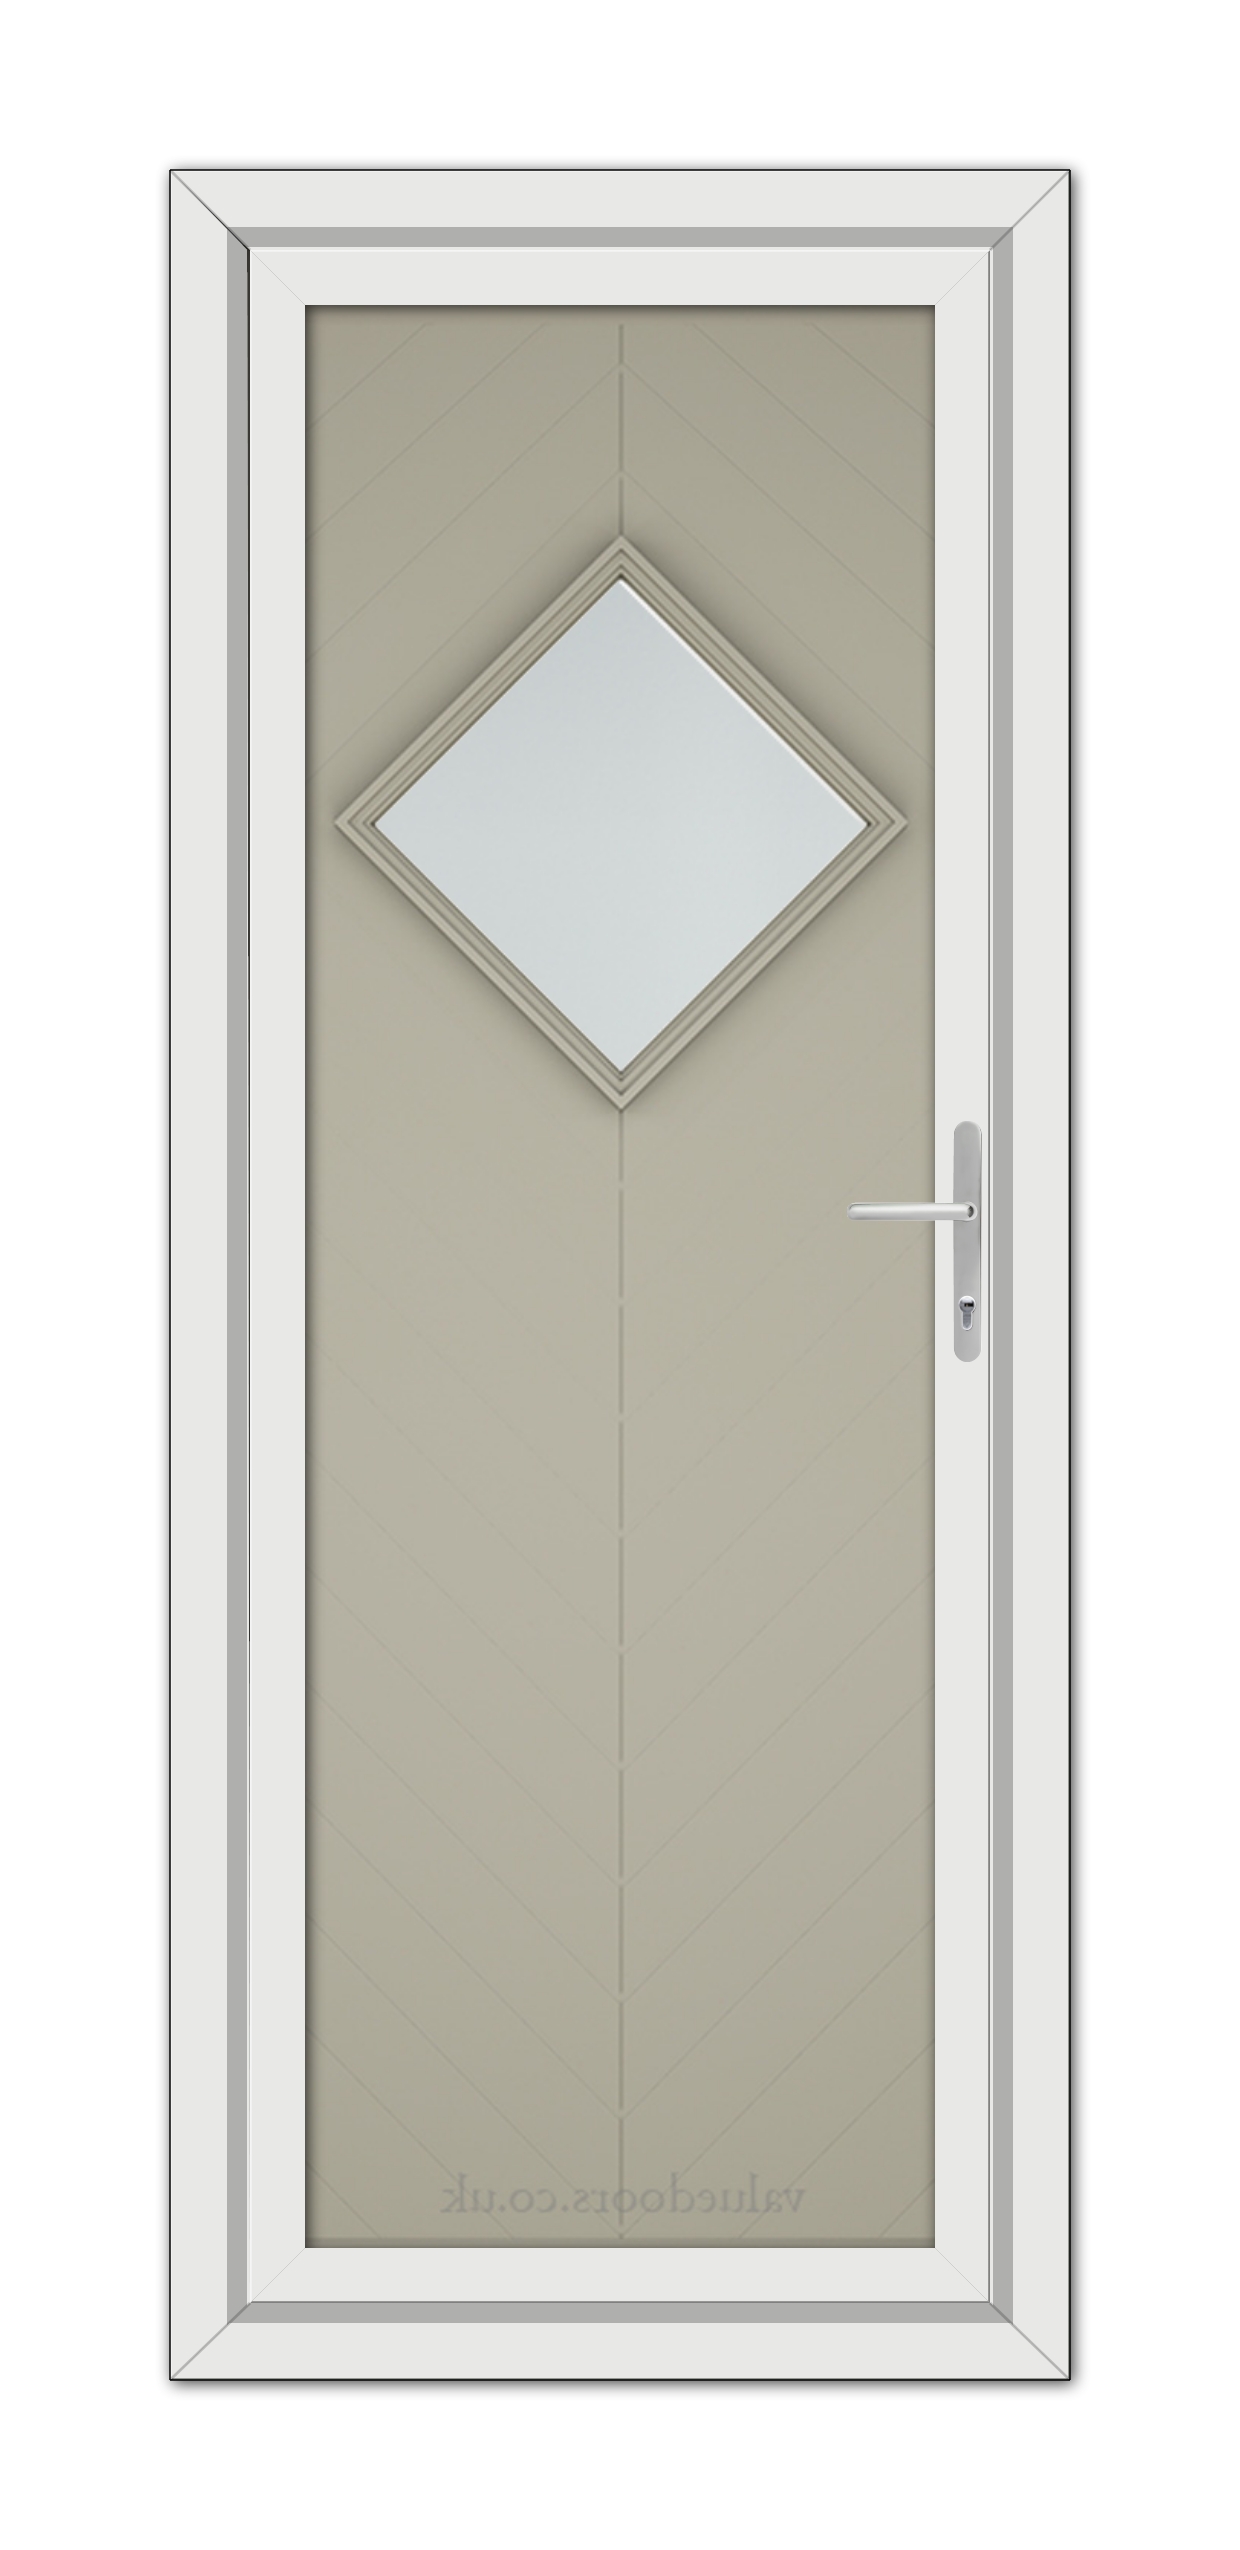 A modern Pebble Grey Hamburg uPVC door featuring a diamond-shaped window at the center, with a silver handle on the right.